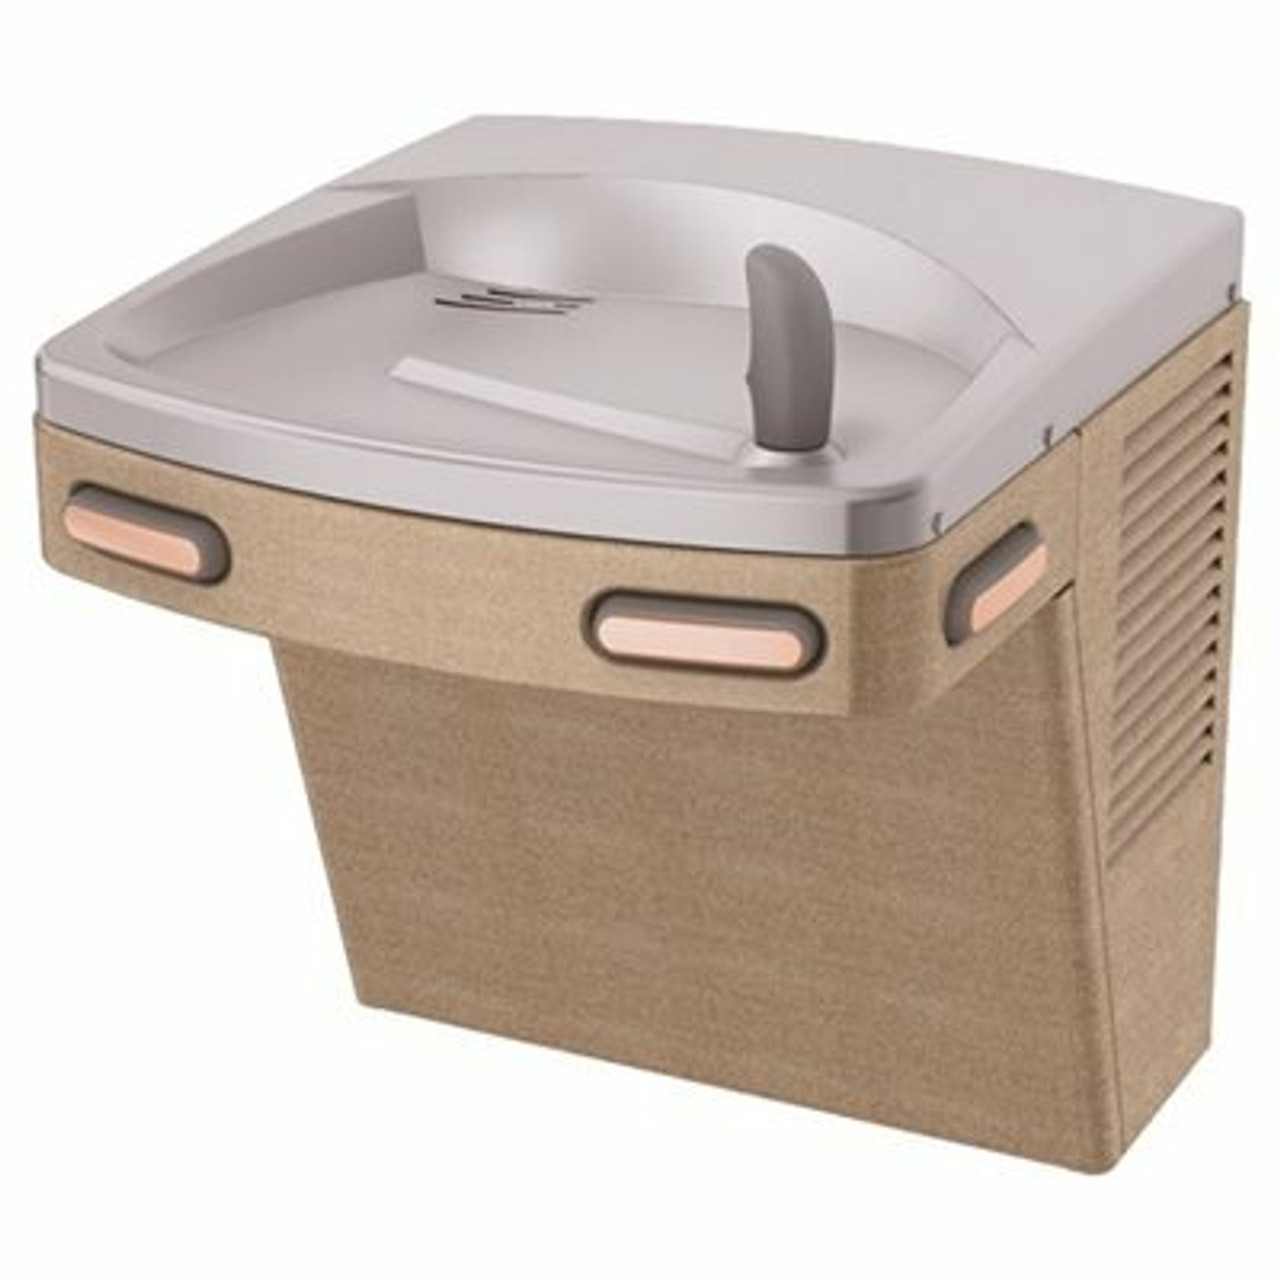 Oasis Versacooler Ii Energy/Water Conservation Model, Ada, Sandstone Single Level Refrigerated Drinking Fountain